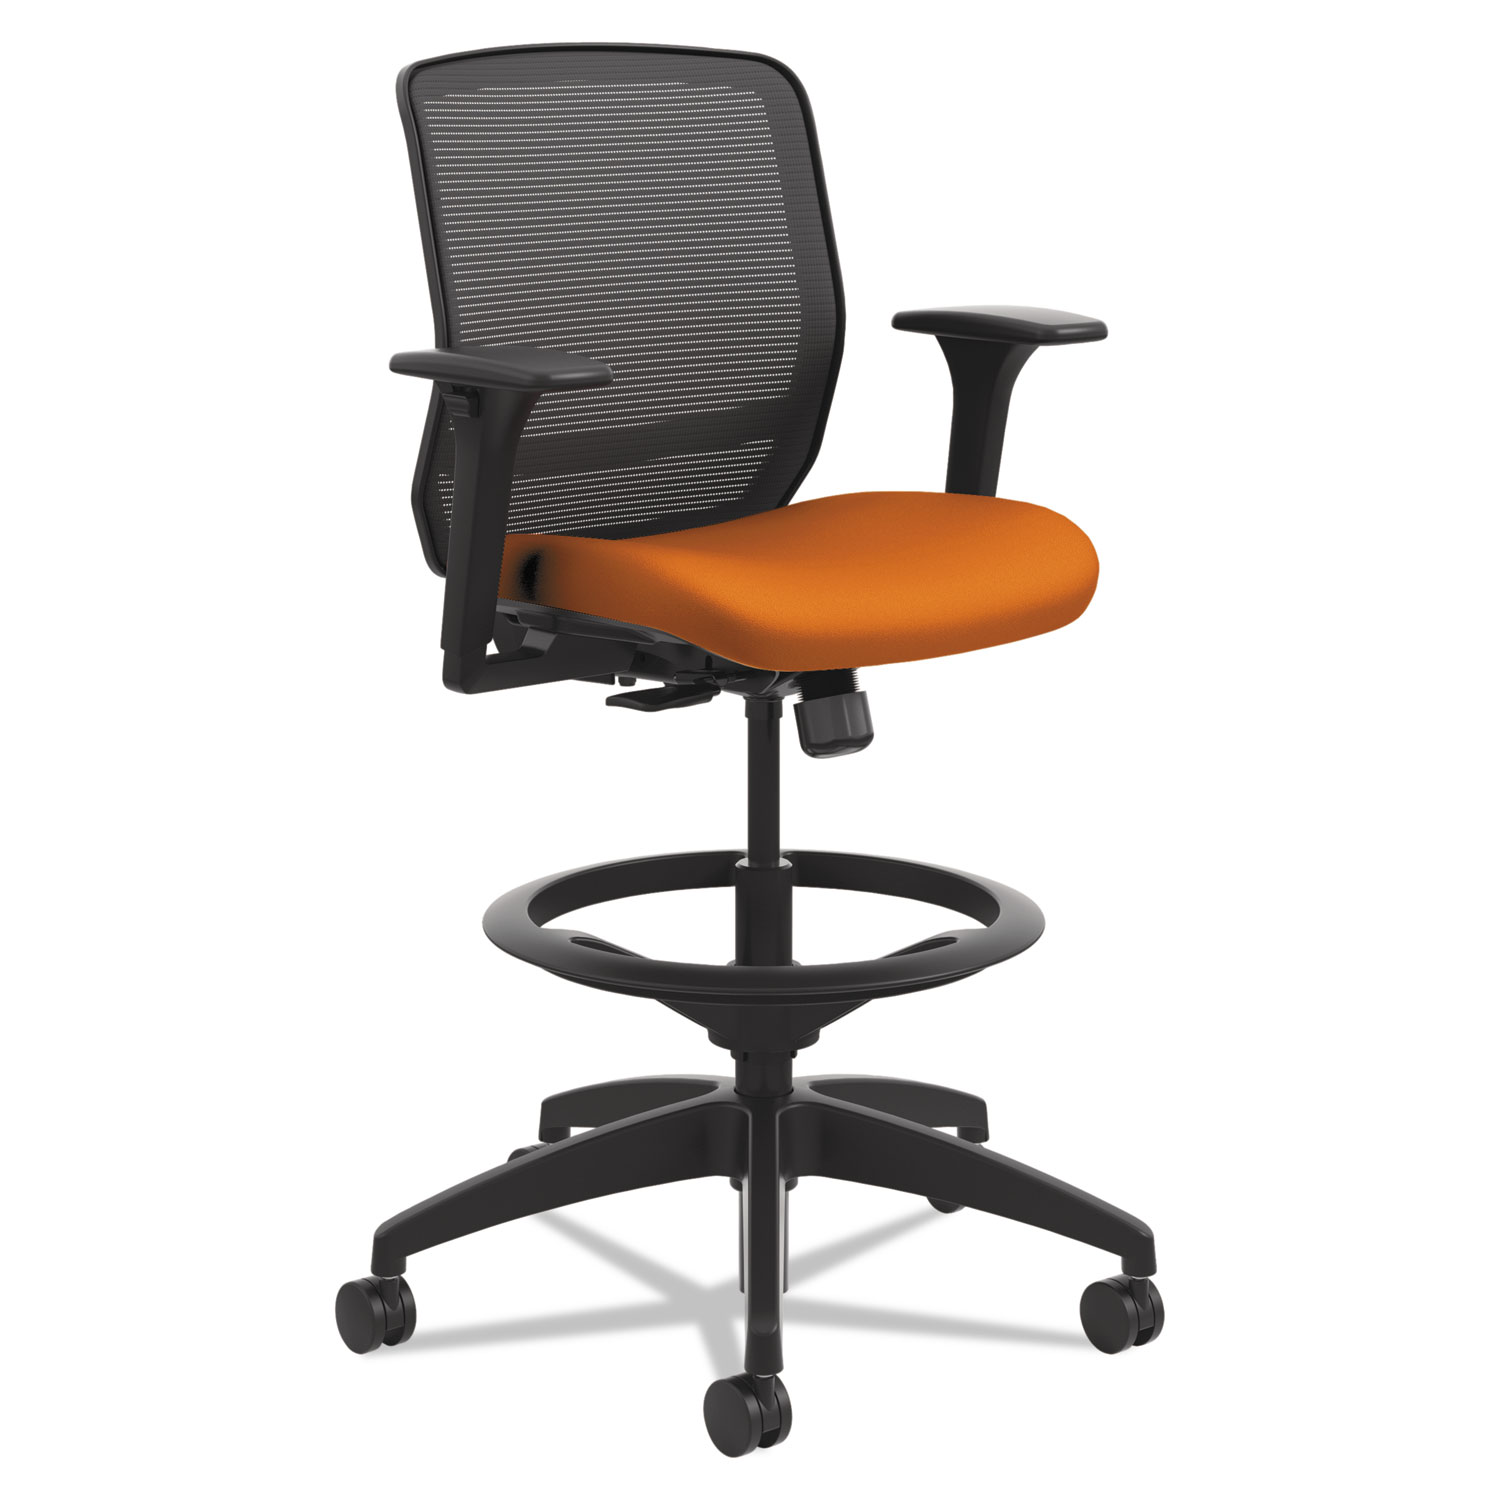  HON HQTSM.Y0.A.H.IM.CU47.SB Quotient Series Mesh Mid-Back Task Stool, 33 Seat Height, Supports up to 300 lbs., Apricot Seat/Black Back, Black Base (HONQTSMY1ACU47) 